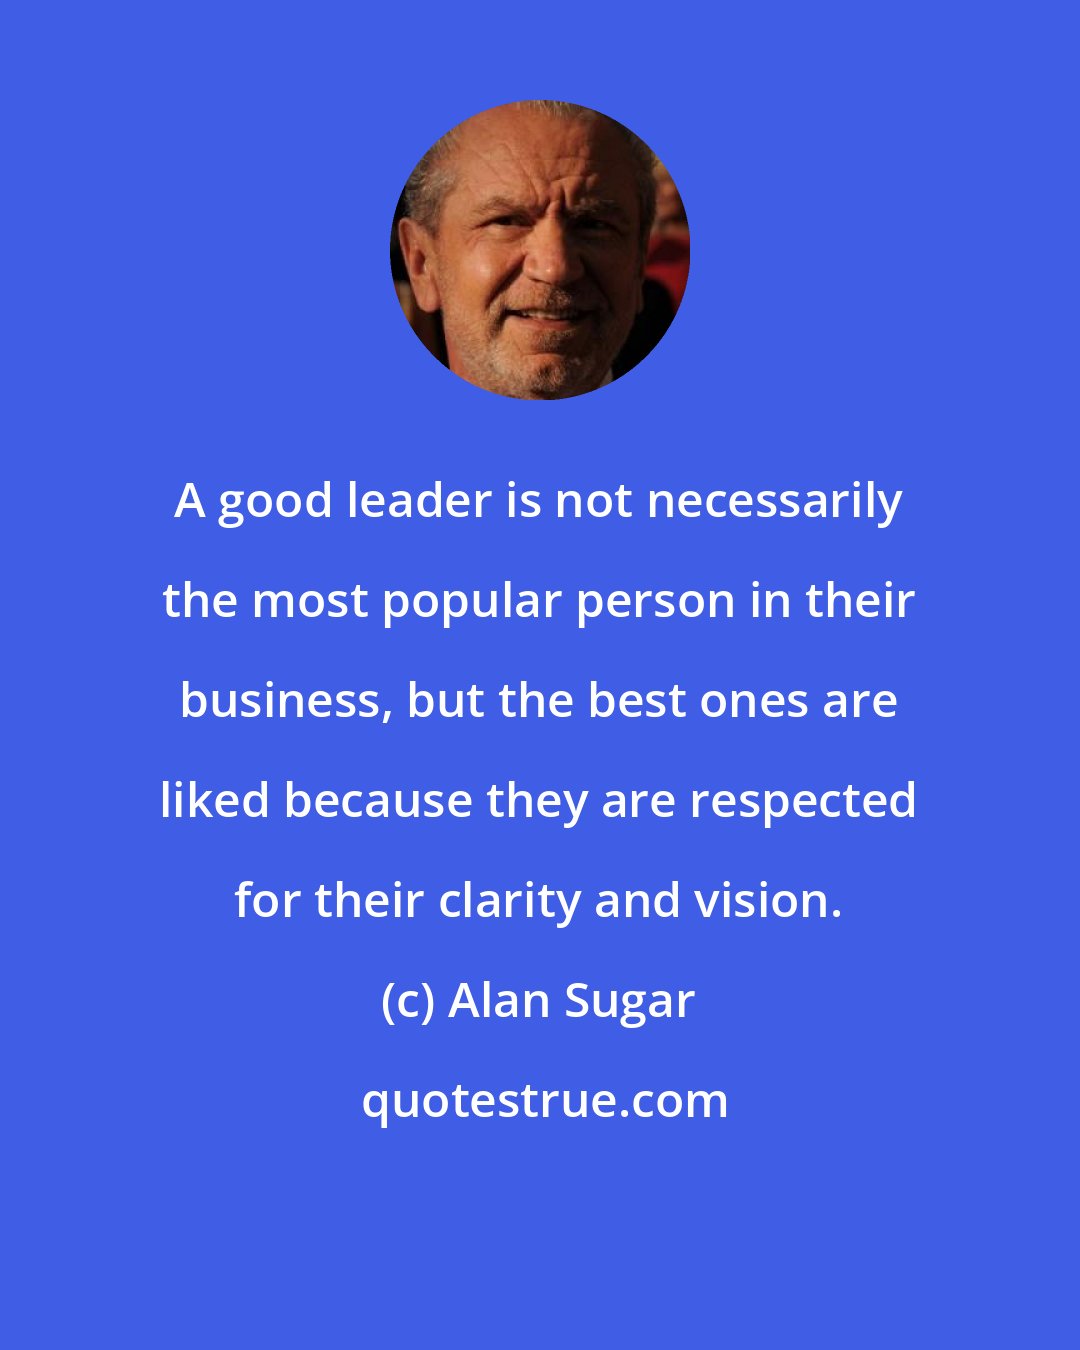 Alan Sugar: A good leader is not necessarily the most popular person in their business, but the best ones are liked because they are respected for their clarity and vision.